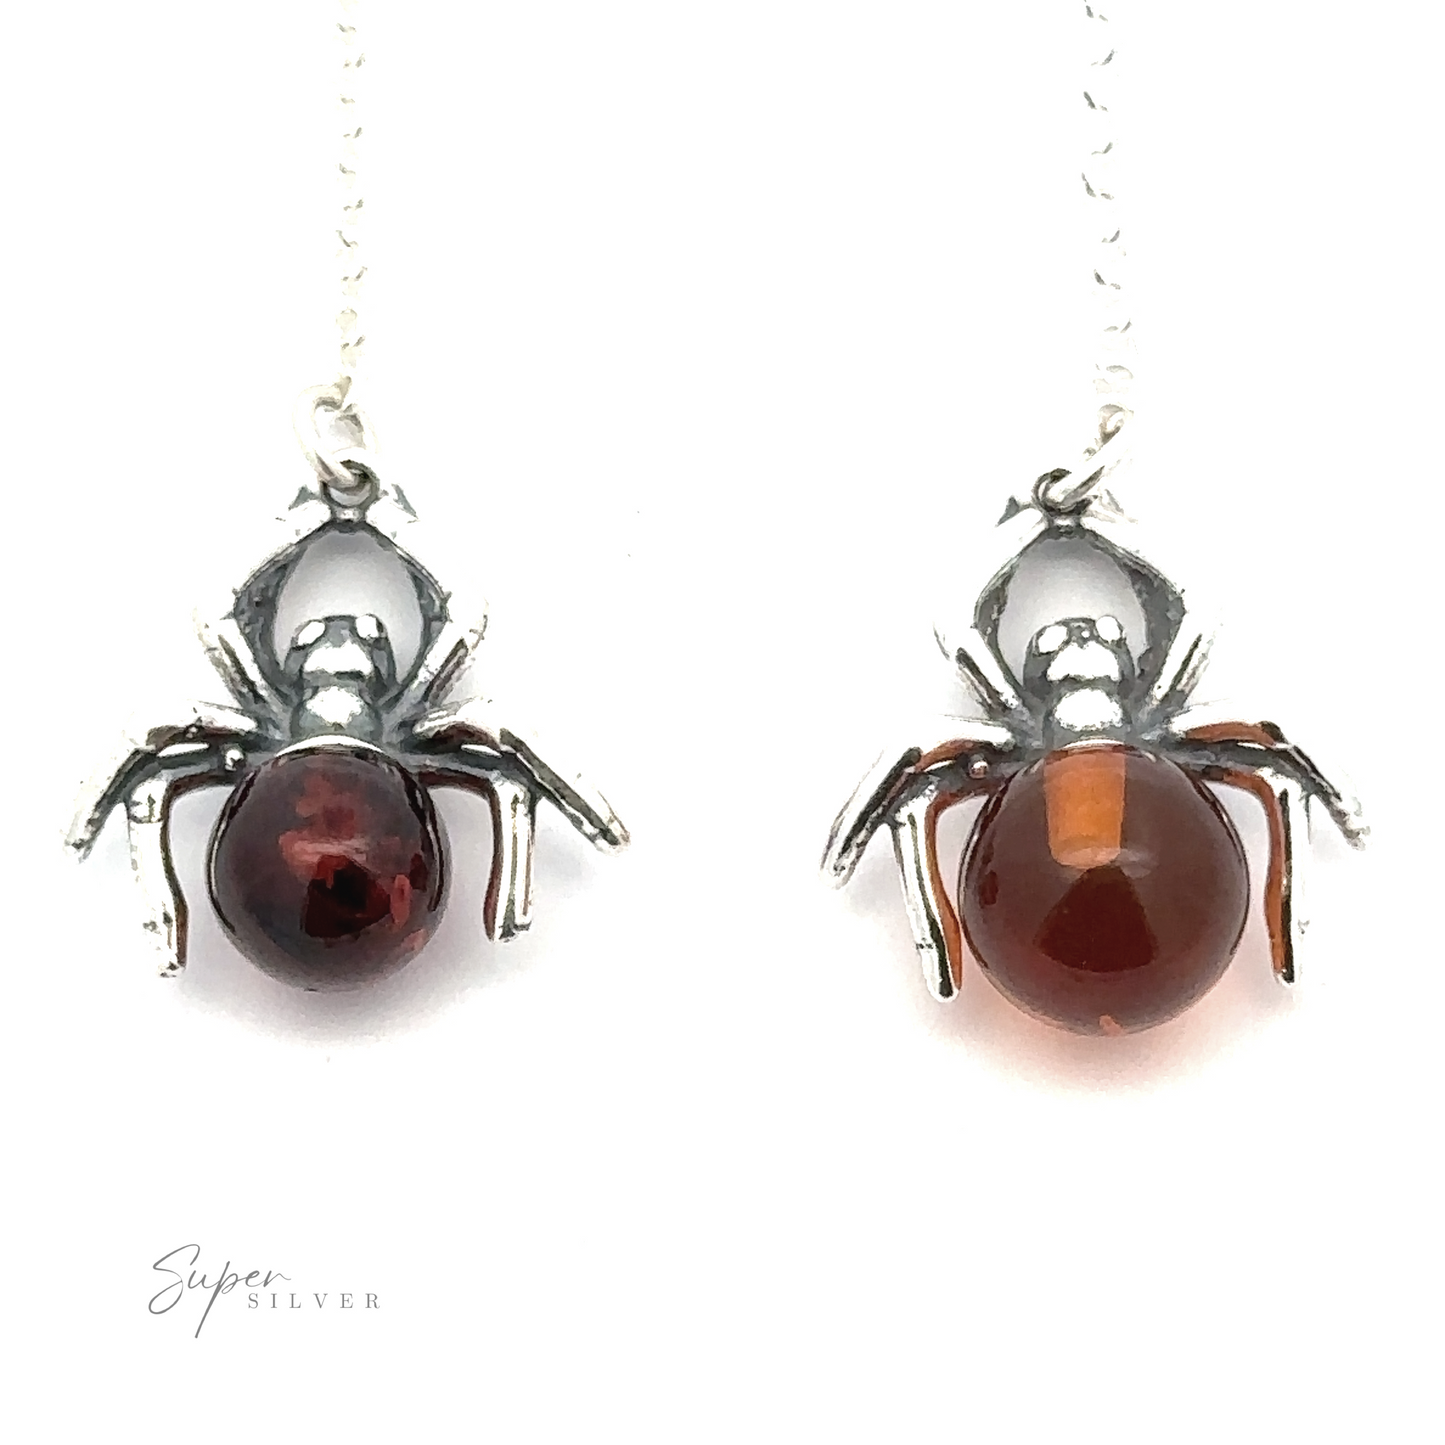 
                  
                    Two silver-colored spider-shaped pendants with gemstone bodies exude a witchy vibe; the one on the left has a dark red stone, while the one on the right features Baltic amber. The chain is partially visible. This product is called the Baltic Amber Spider Necklace.
                  
                